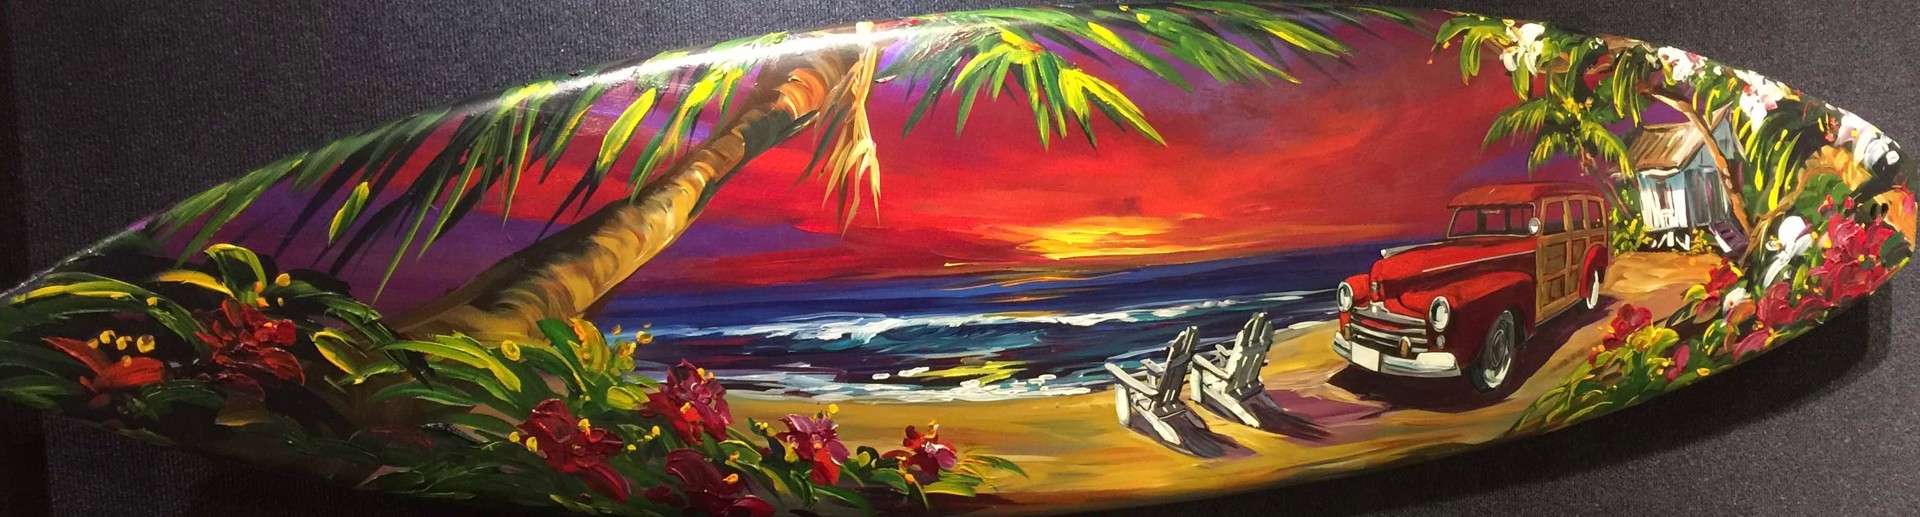 Surfboard: Sunset Ride by 